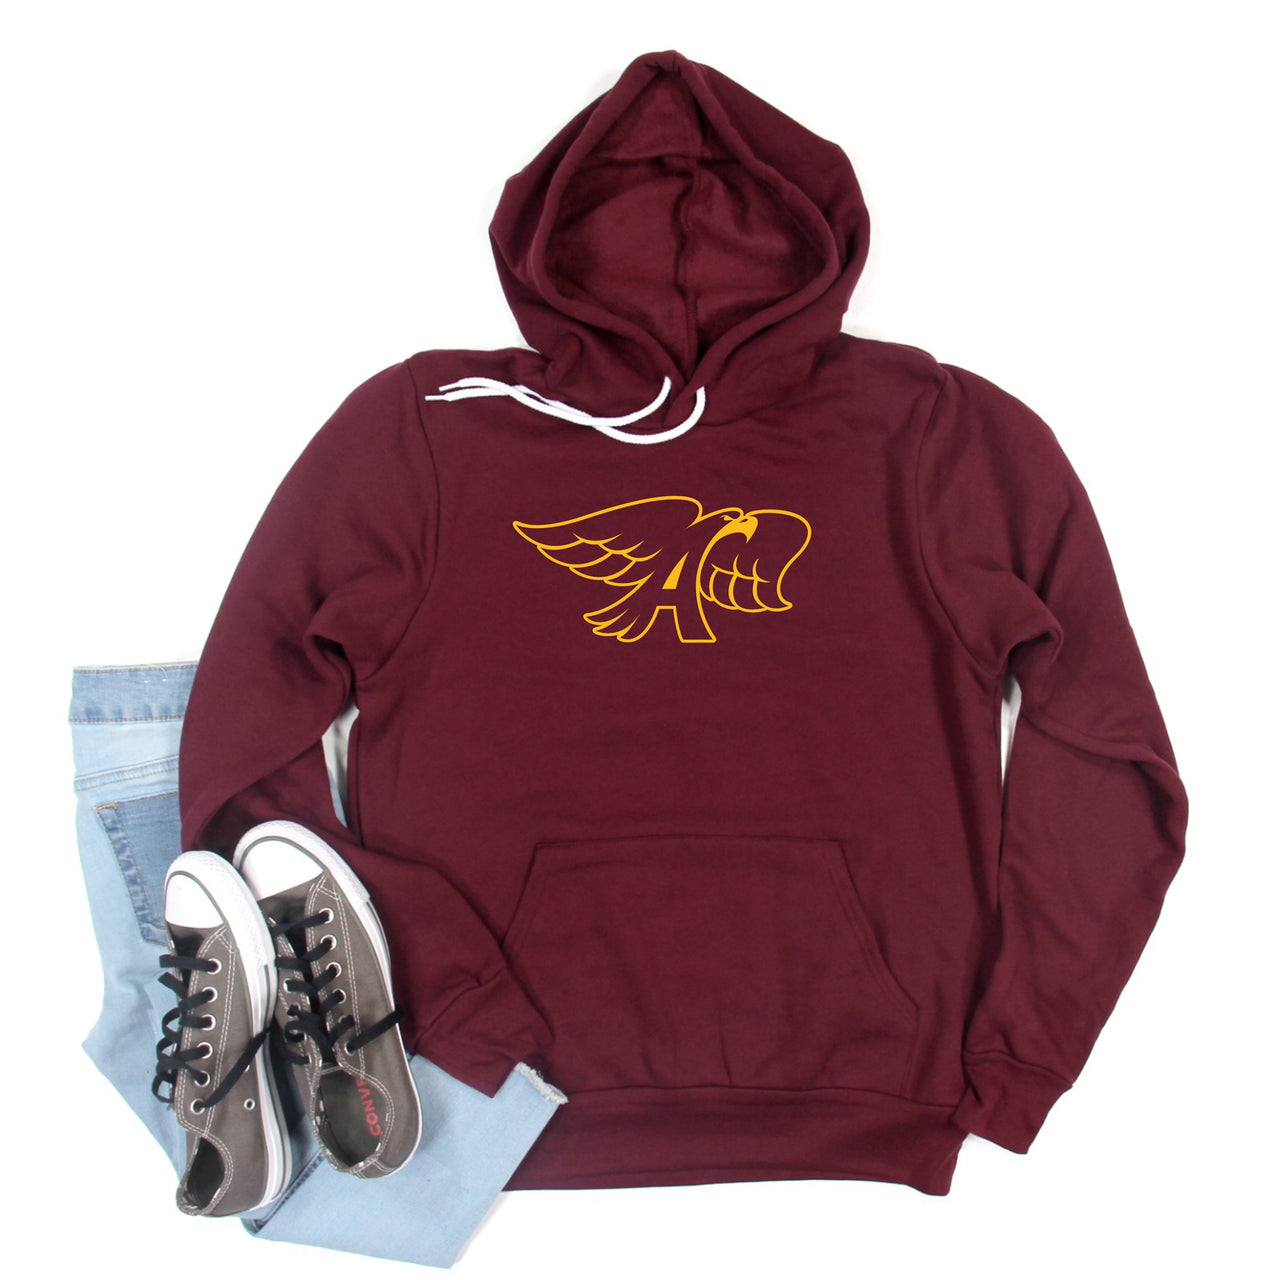 Adult - (6 Apparel Options) - Ankeny Hawks Collection